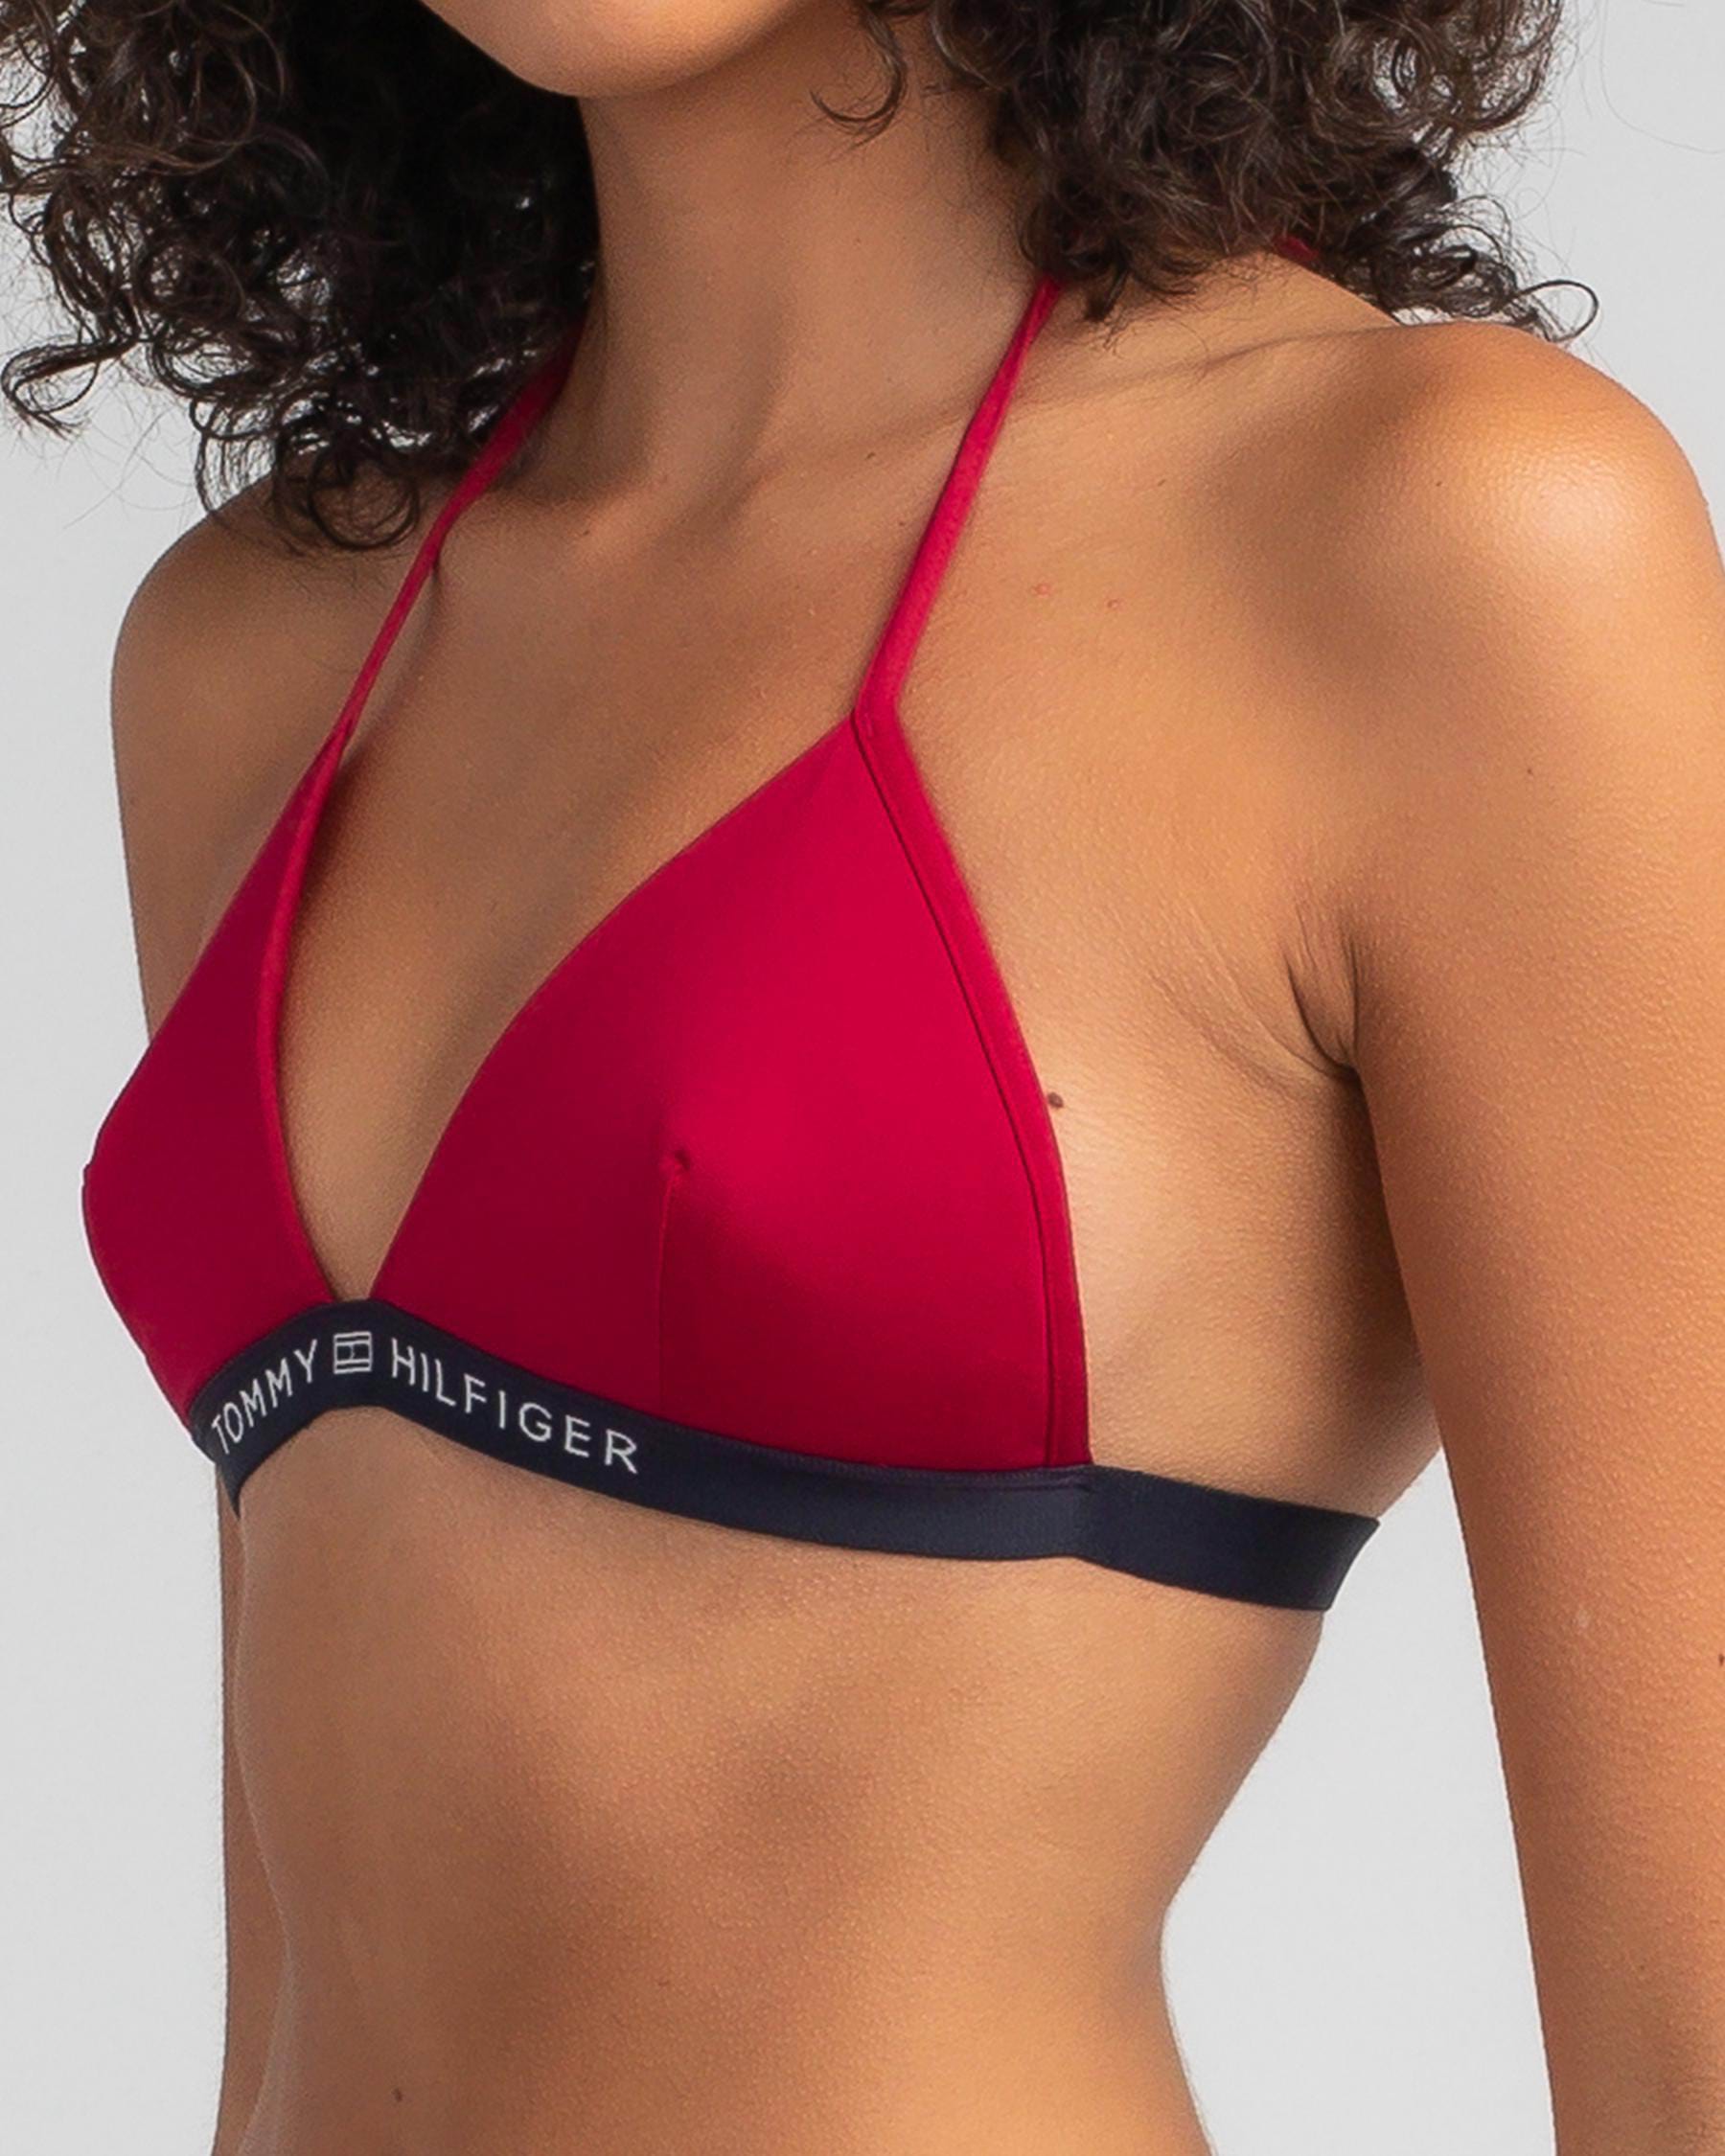 Tommy Hilfiger Core Solid Triangle Bikini Top In Magenta Fast Shipping & Easy Returns - Beach United States